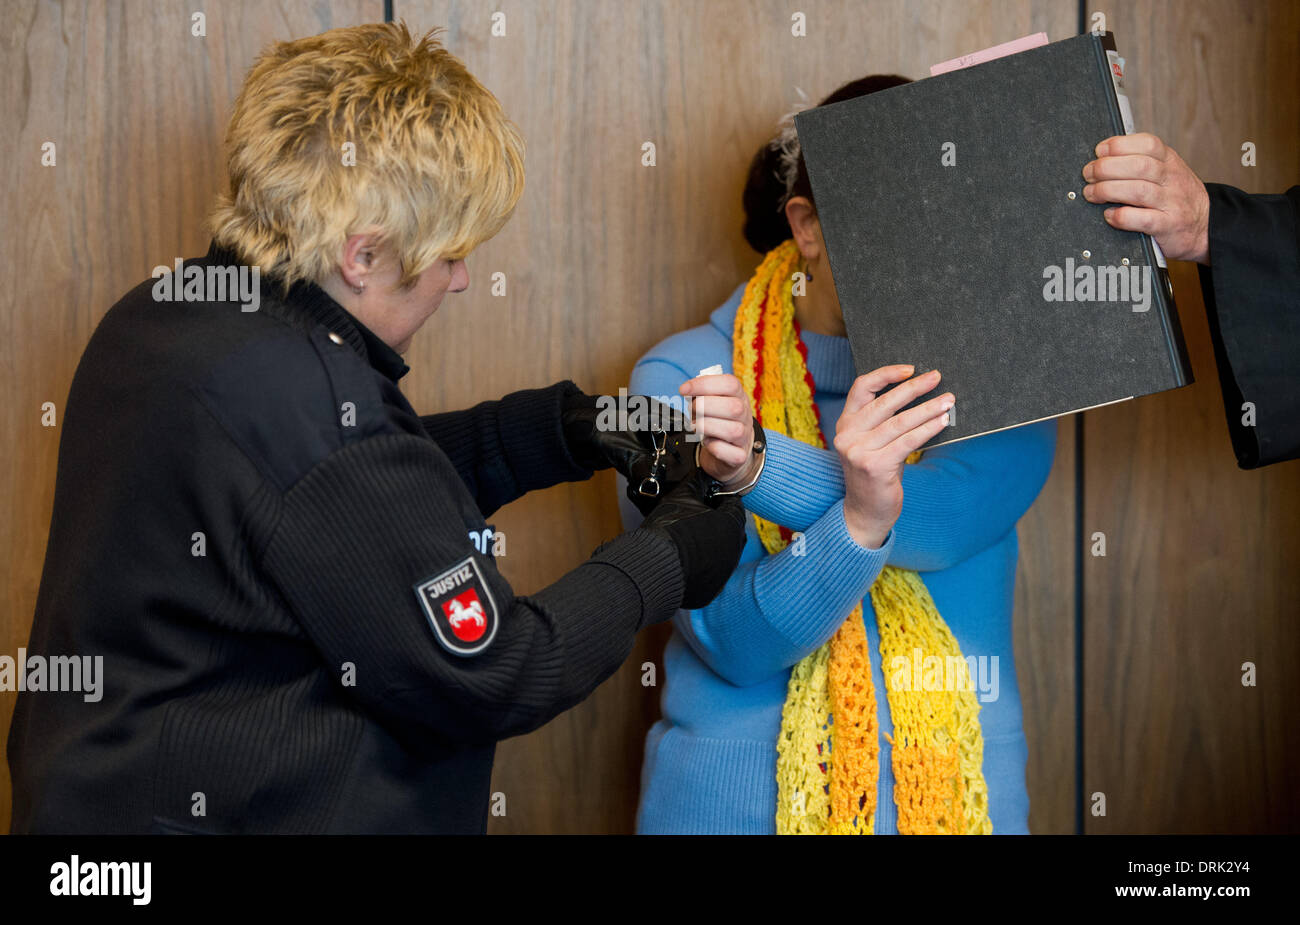 Hildesheim, Germany. 28th Jan, 2014. A judicial officer removes the handcuffs of defendant Evgeniya C. at the district court in Hildesheim, Germany, 28 January 2014. The woman is on trial for the death of her baby. She is accused of giving birth to a boy on her toilet and then repeatedly flushing it. It remains uncertain whether the baby was still alive at birth. Photo: Julian Stratenschulte/dpa/Alamy Live News Stock Photo